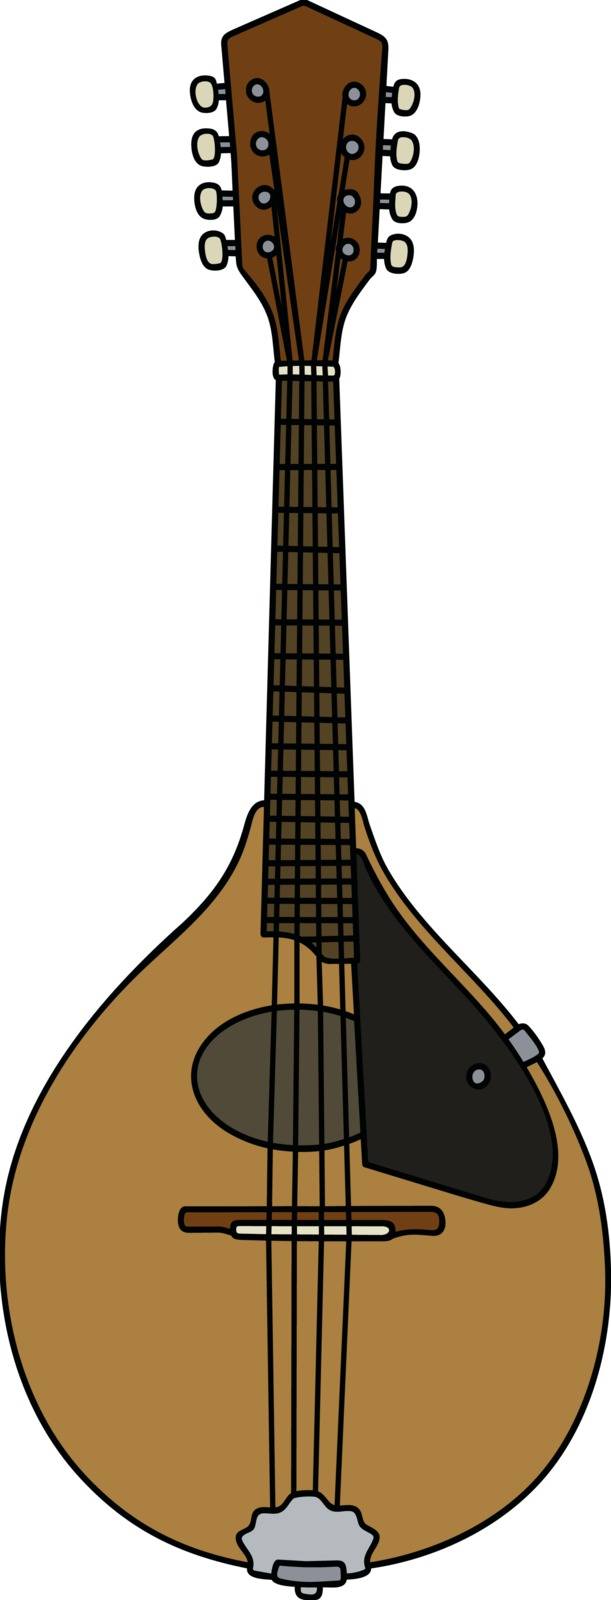 Hand drawing of a classic country mandolin